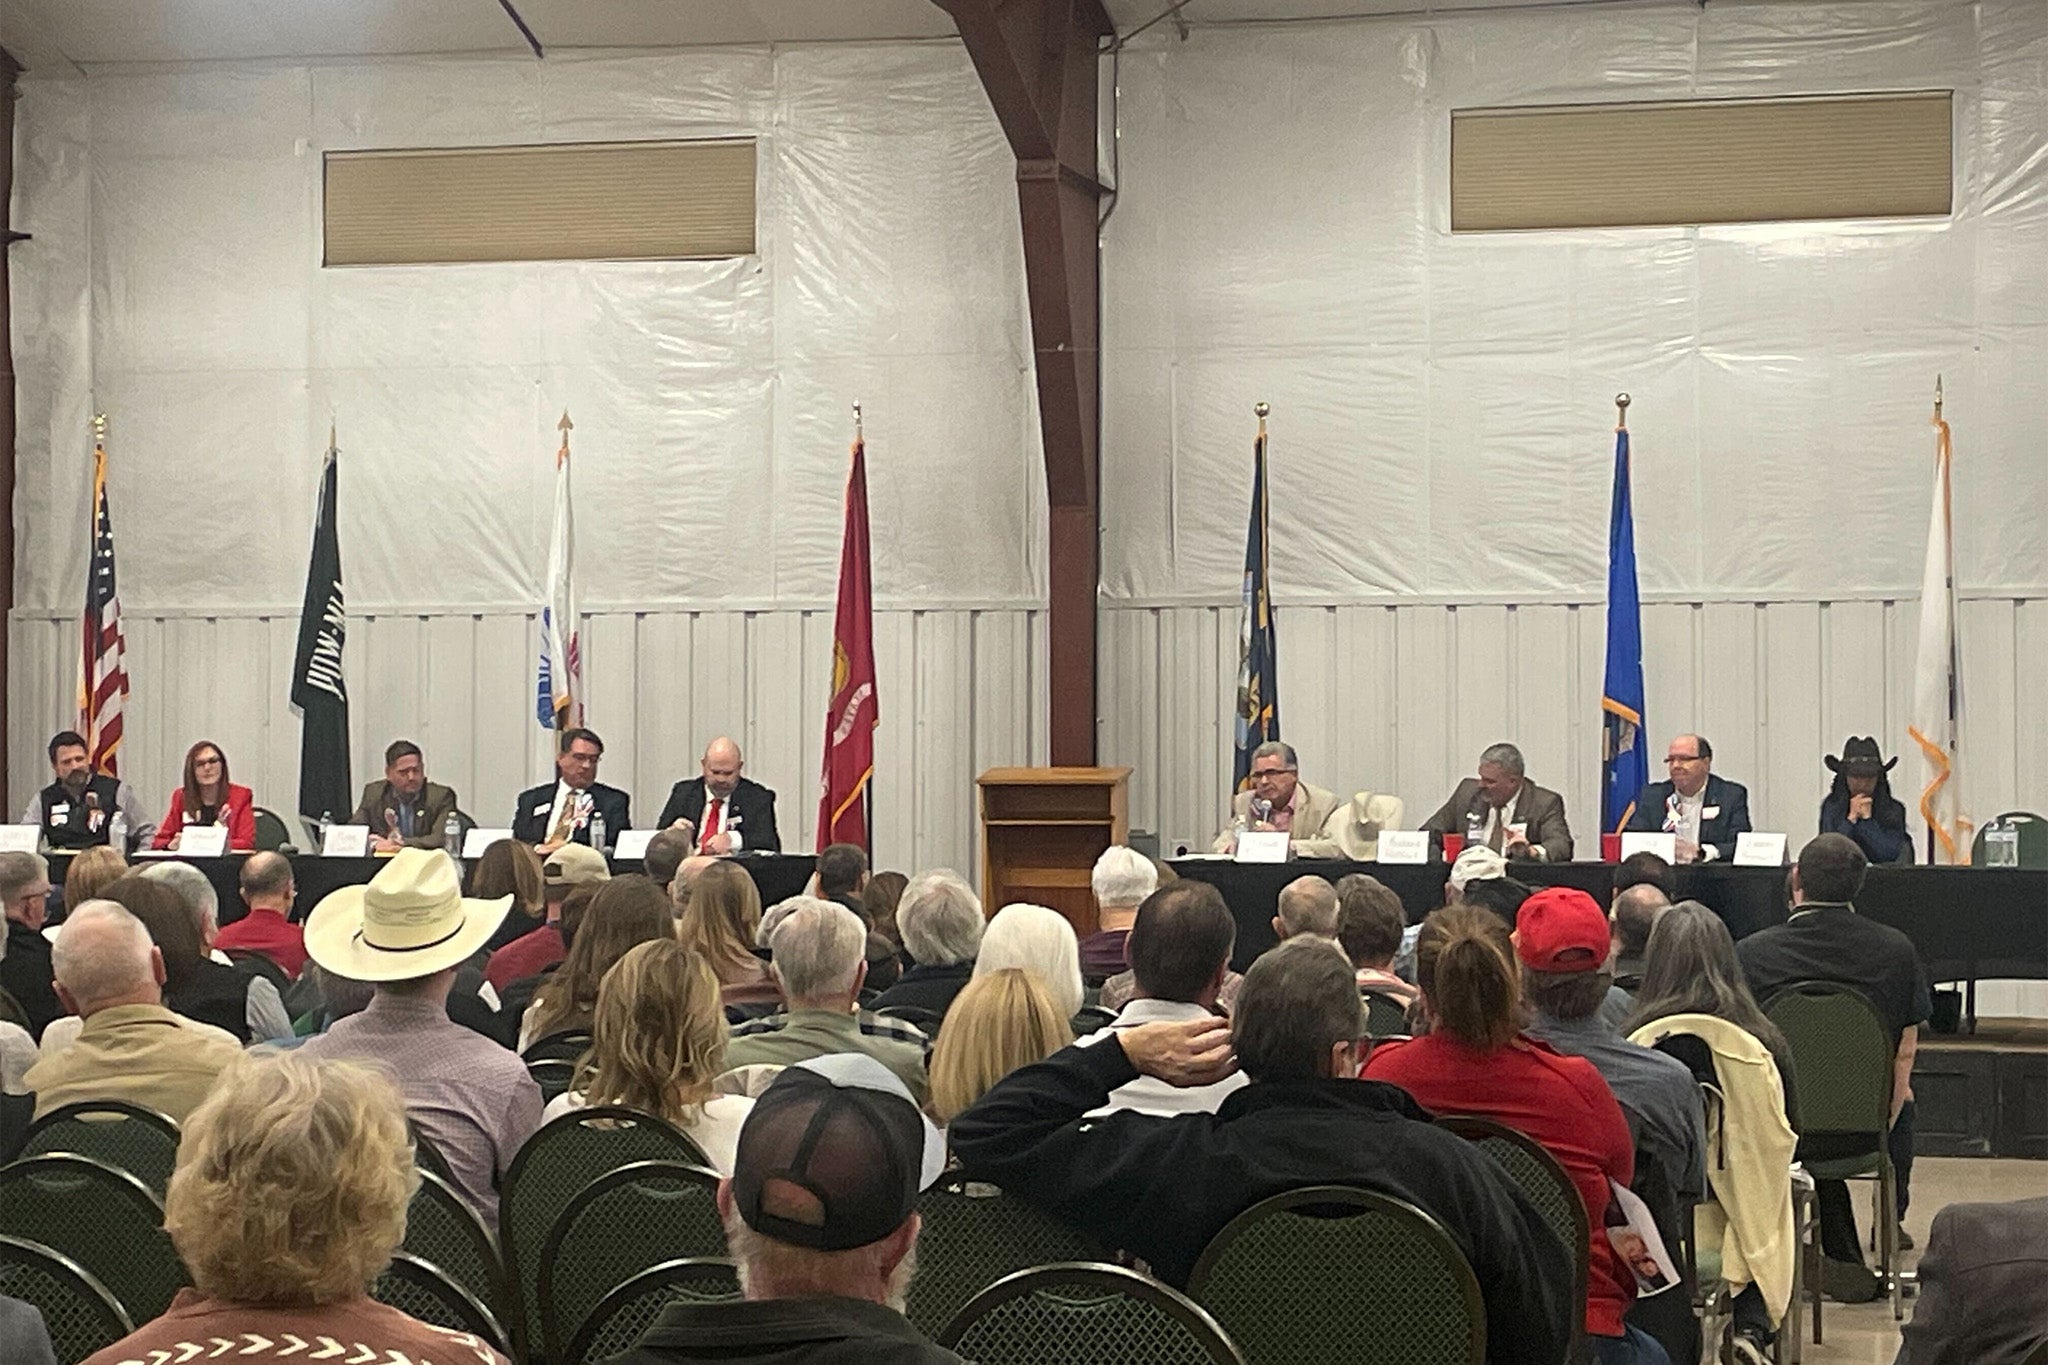 Boebert was joined by eight other Republican candidates at the forum who are vying for the seat; one made his excuses as he cared for a sick elderly mother while another did not turn up